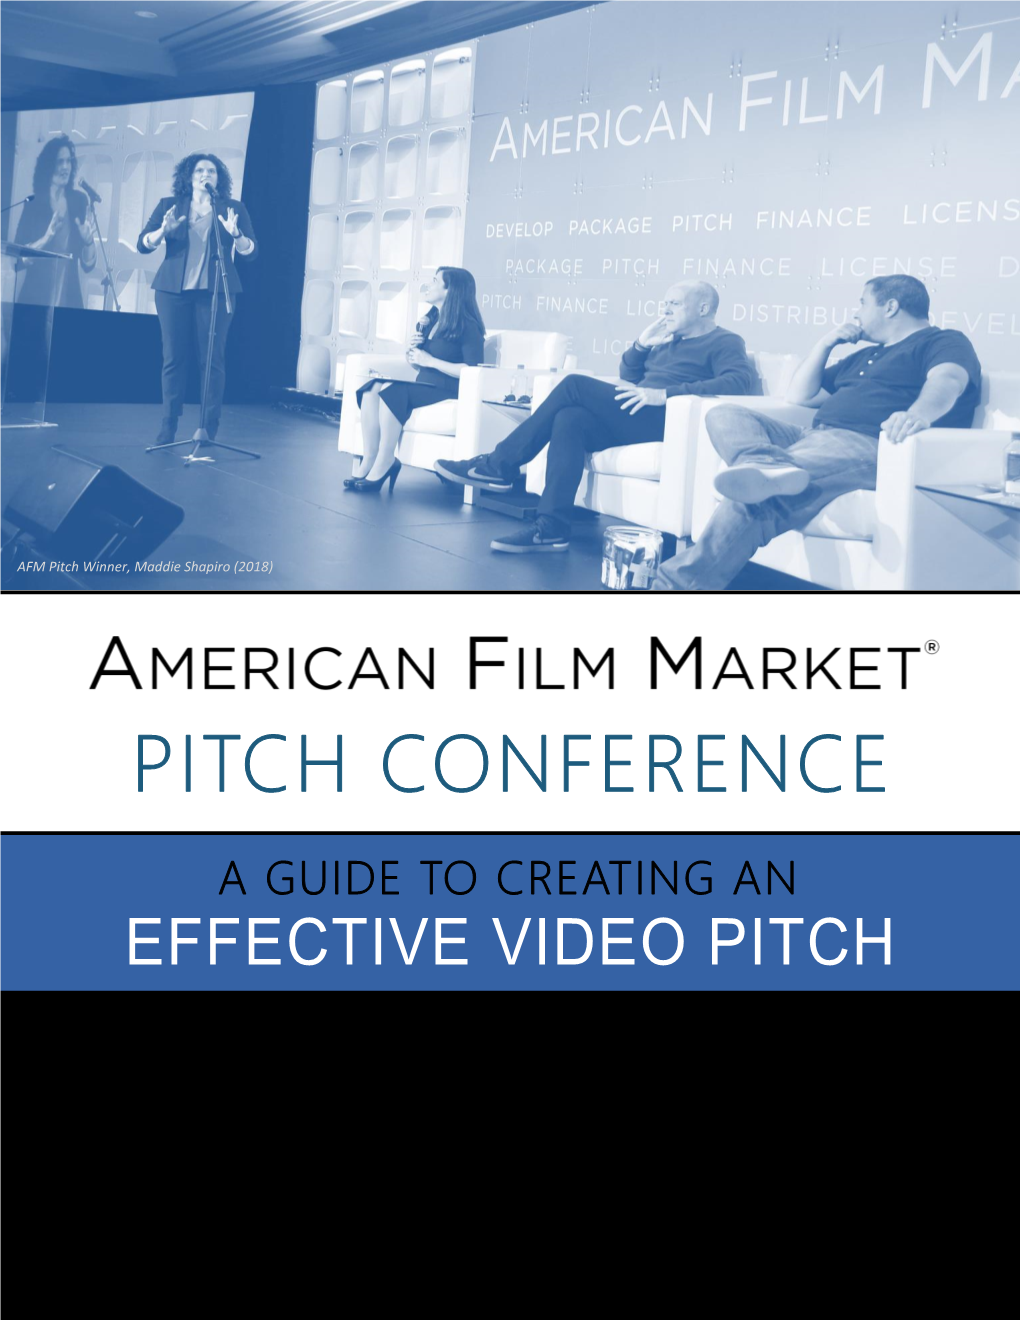 Pitch Conference